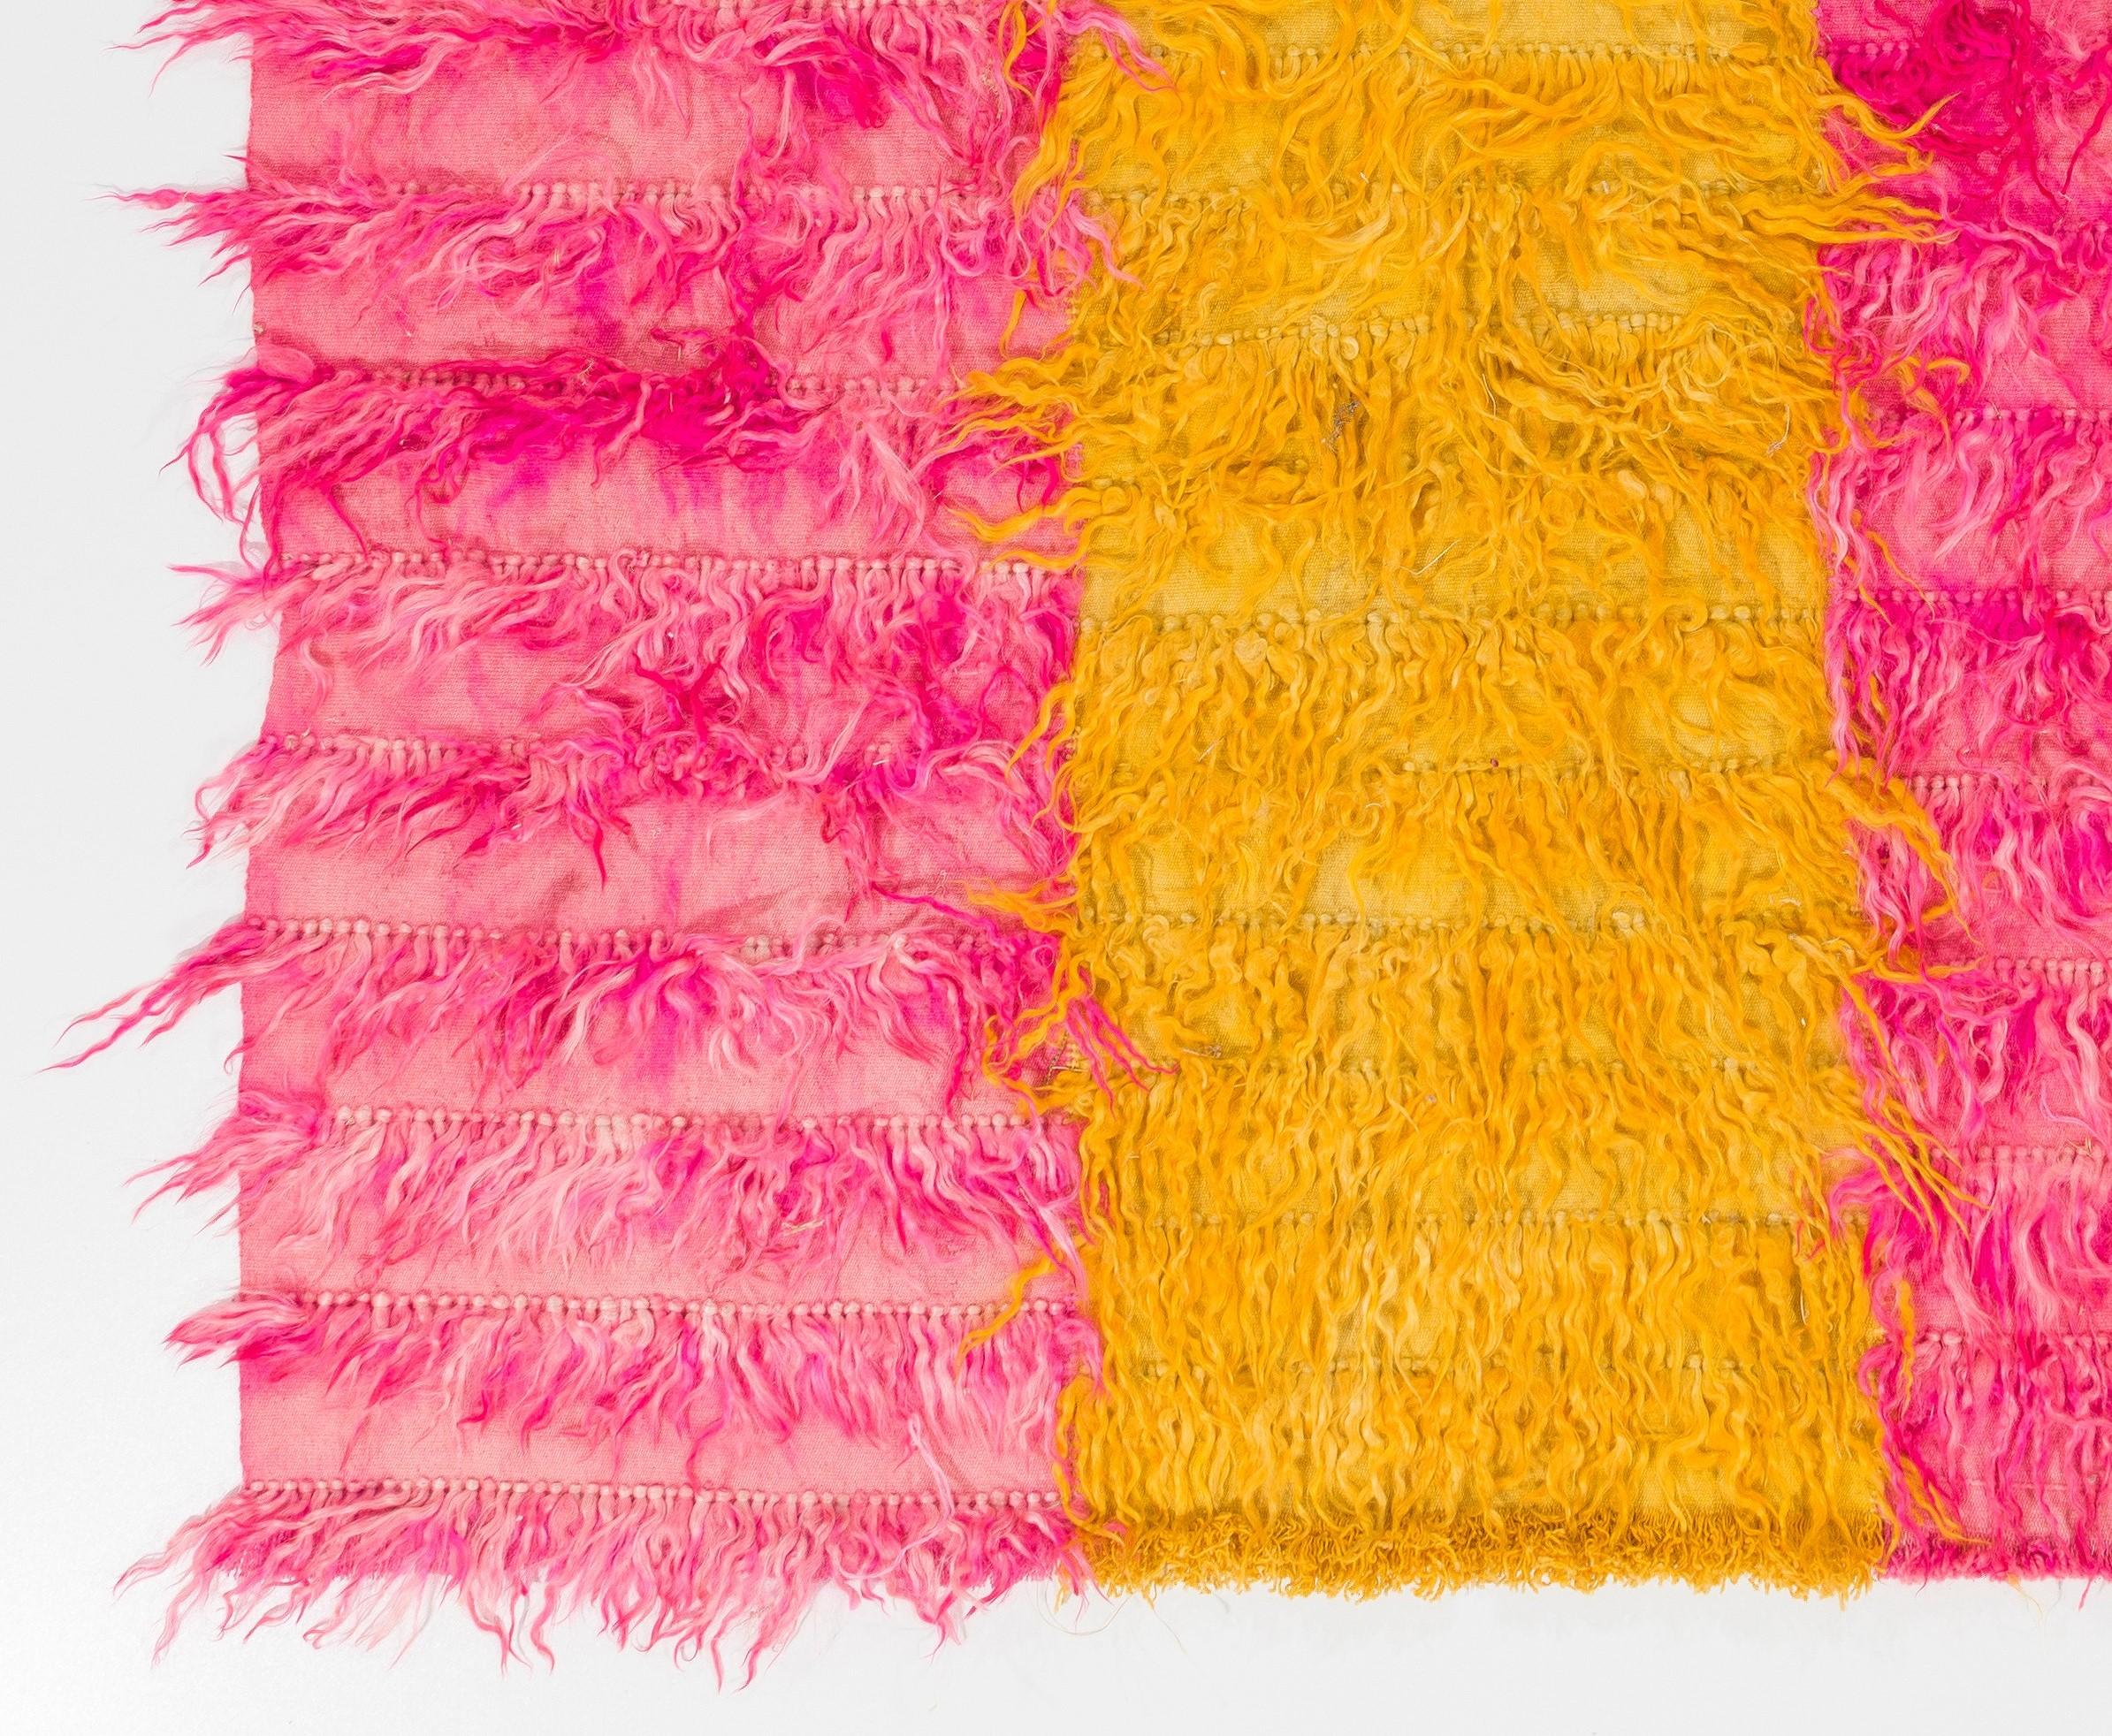 Hand-Woven 8x10 Ft Vintage Pink & Yellow Shag Pile Rug, 100% Wool. Custom Options Available For Sale